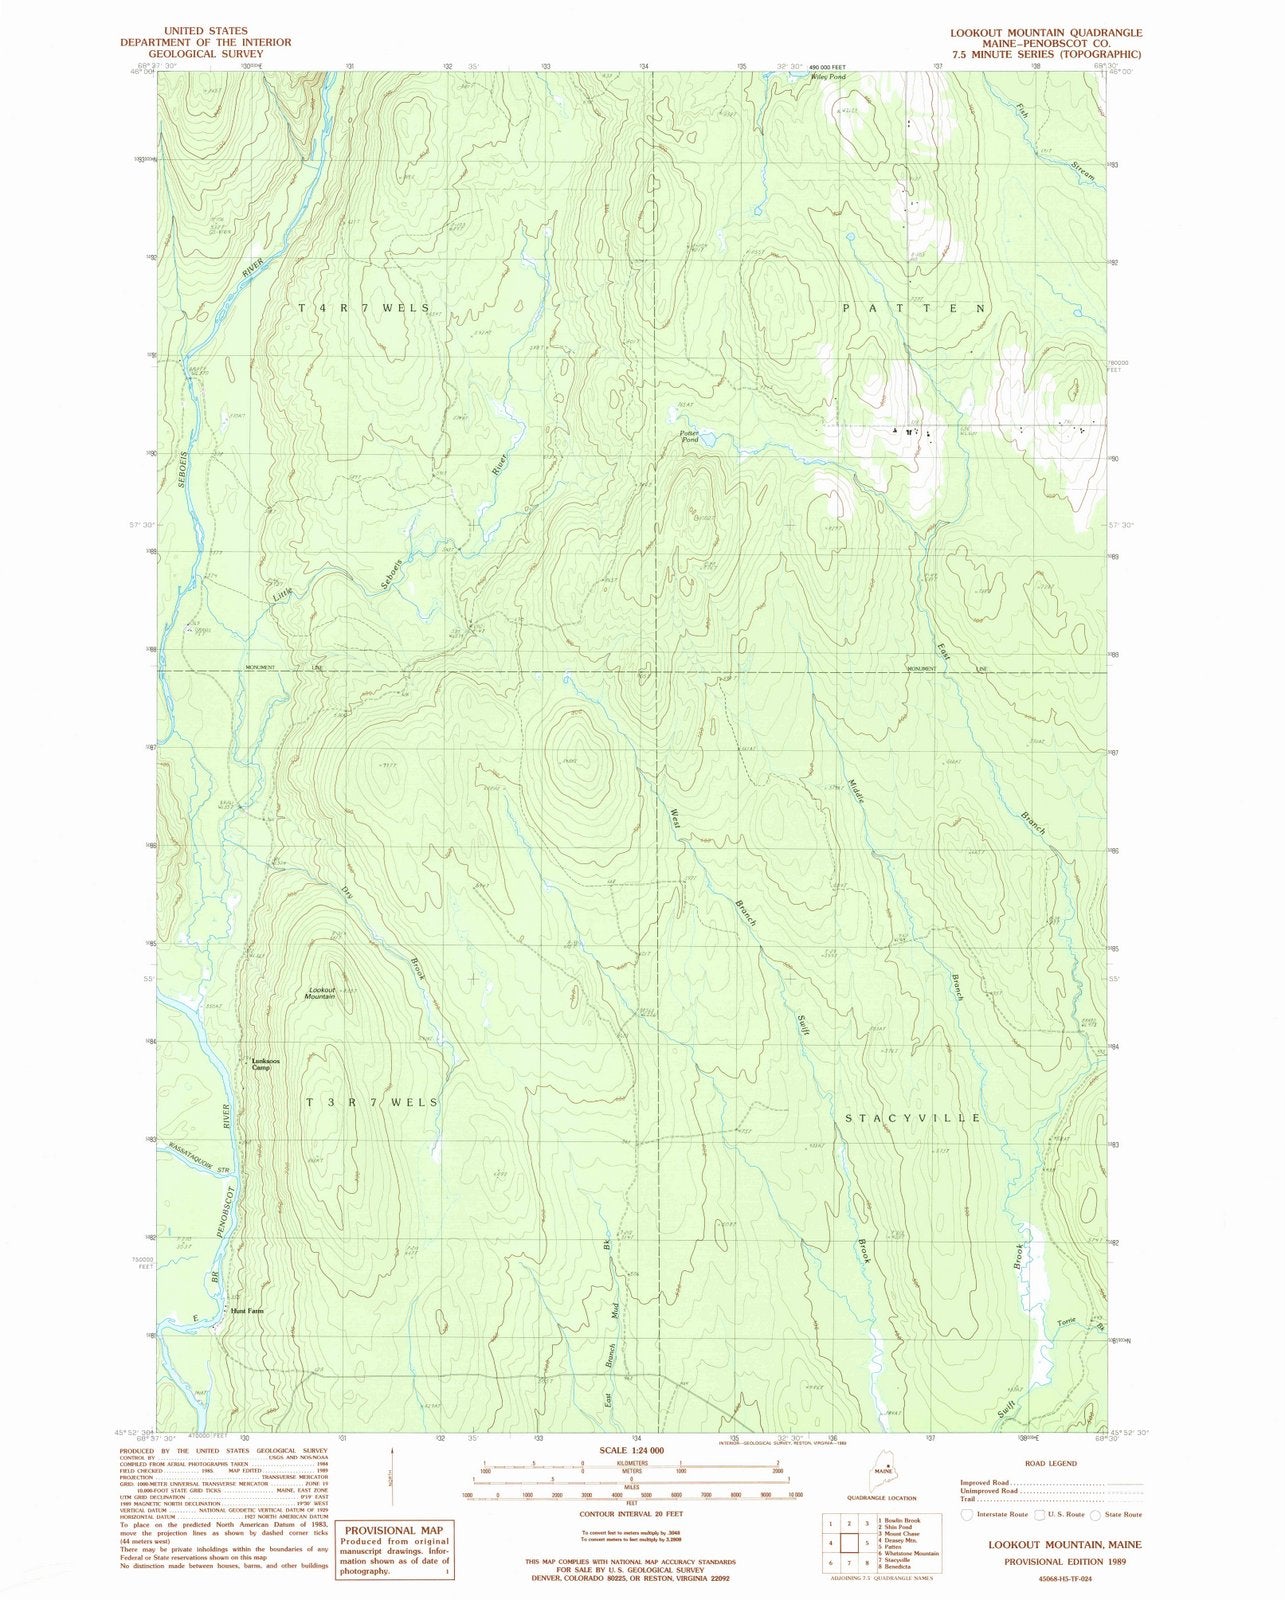 1989 Lookout Mountain, ME - Maine - USGS Topographic Map